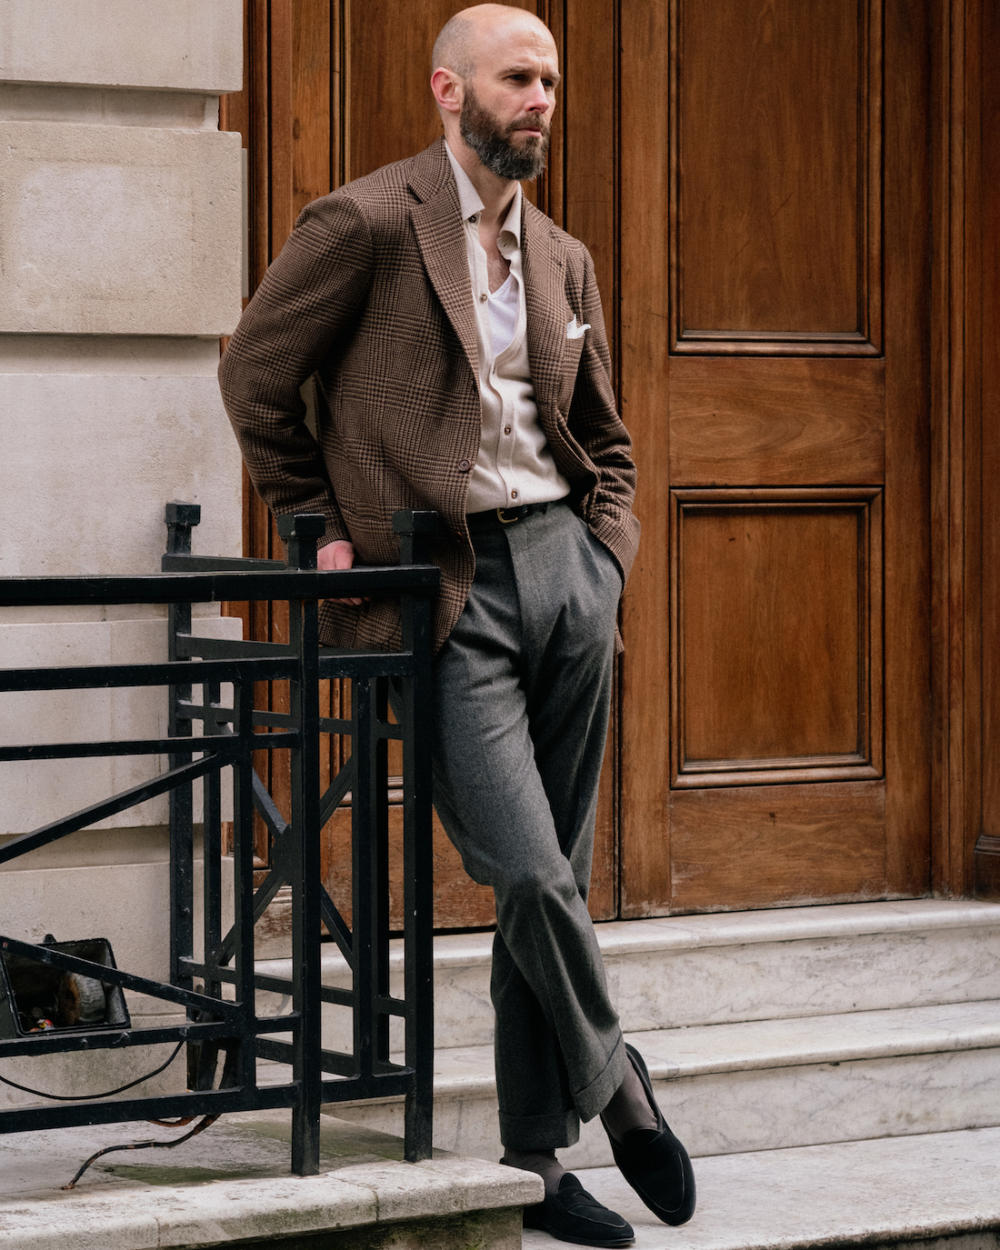 A collared cardigan under a jacket: Ciardi and Colhay’s – Permanent Style